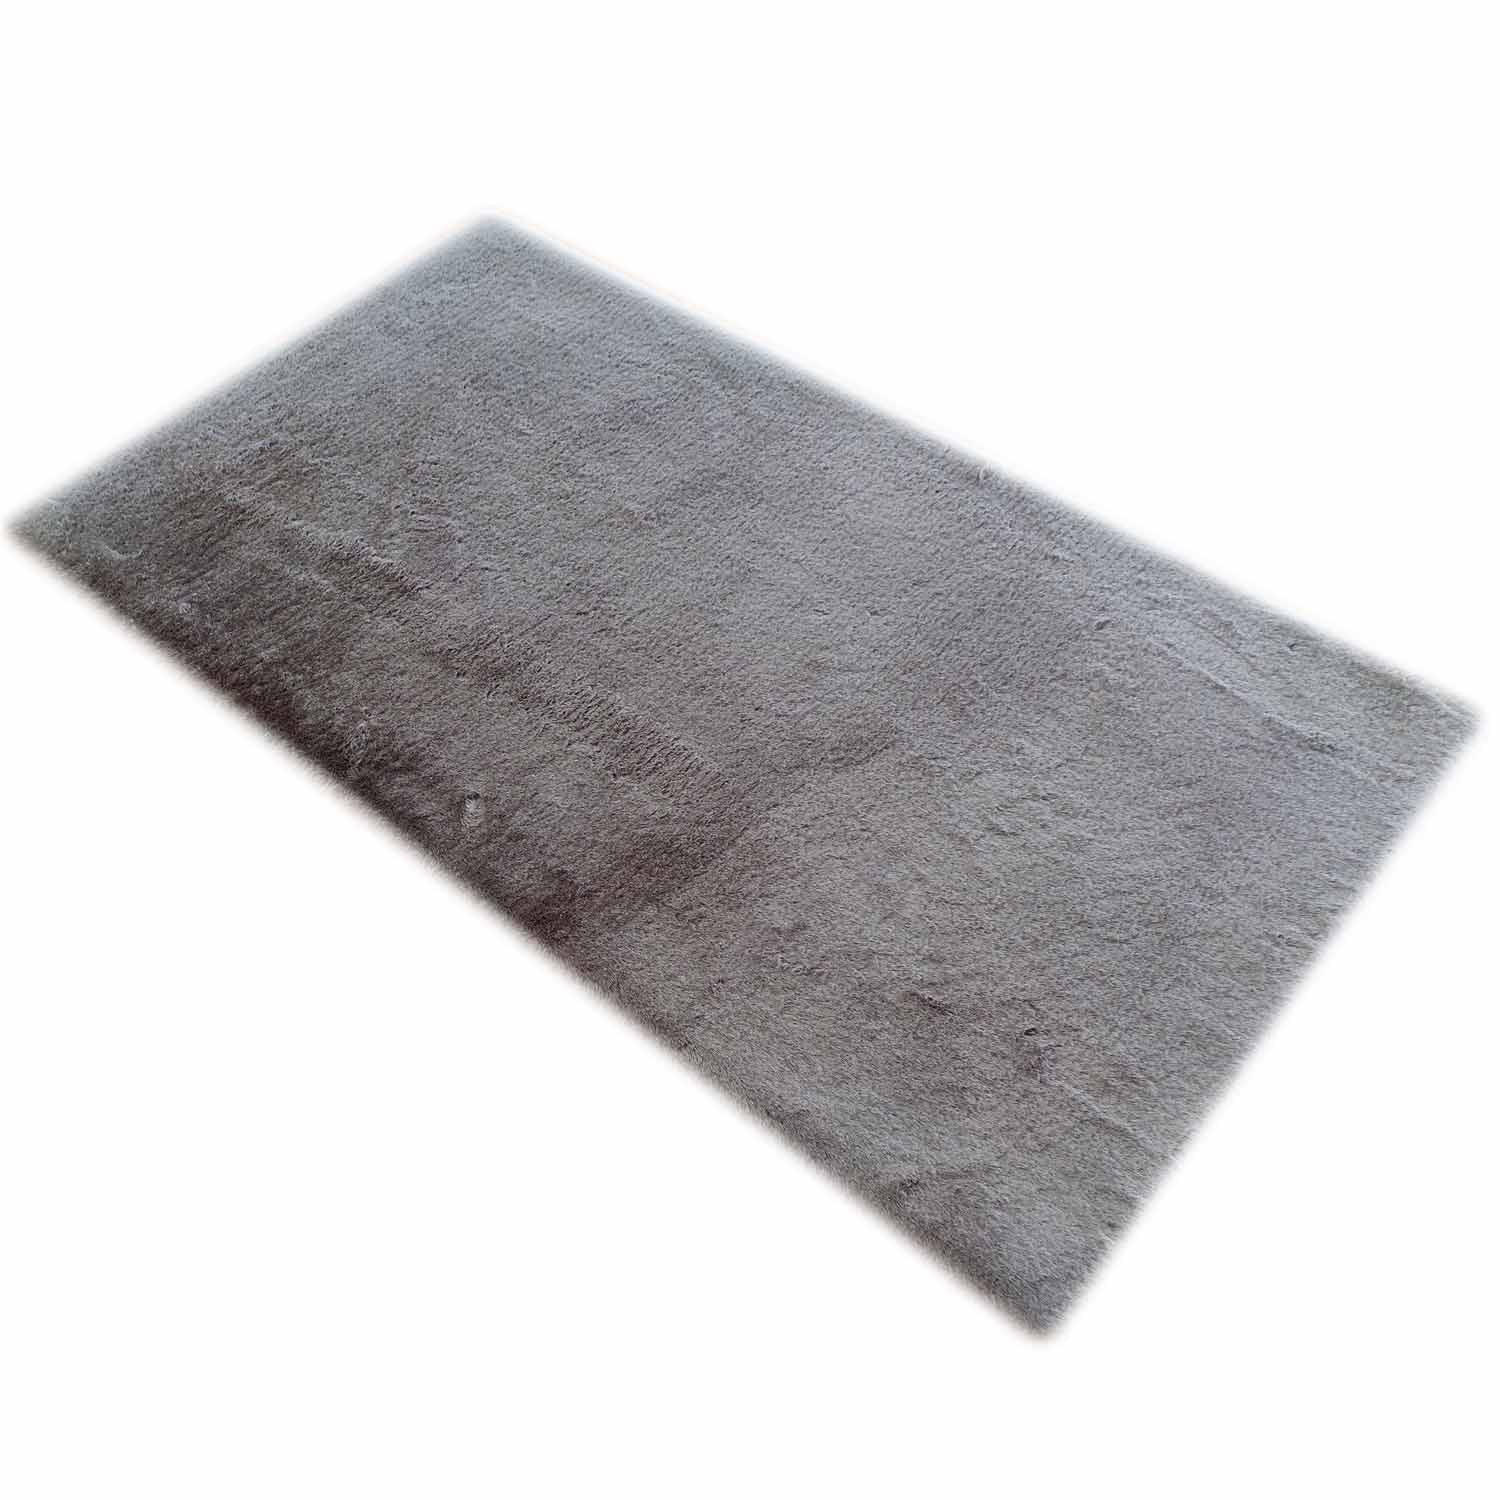 The Home Living Room Bambi Rug 80cm x 150cm - Grey 1 Shaws Department Stores